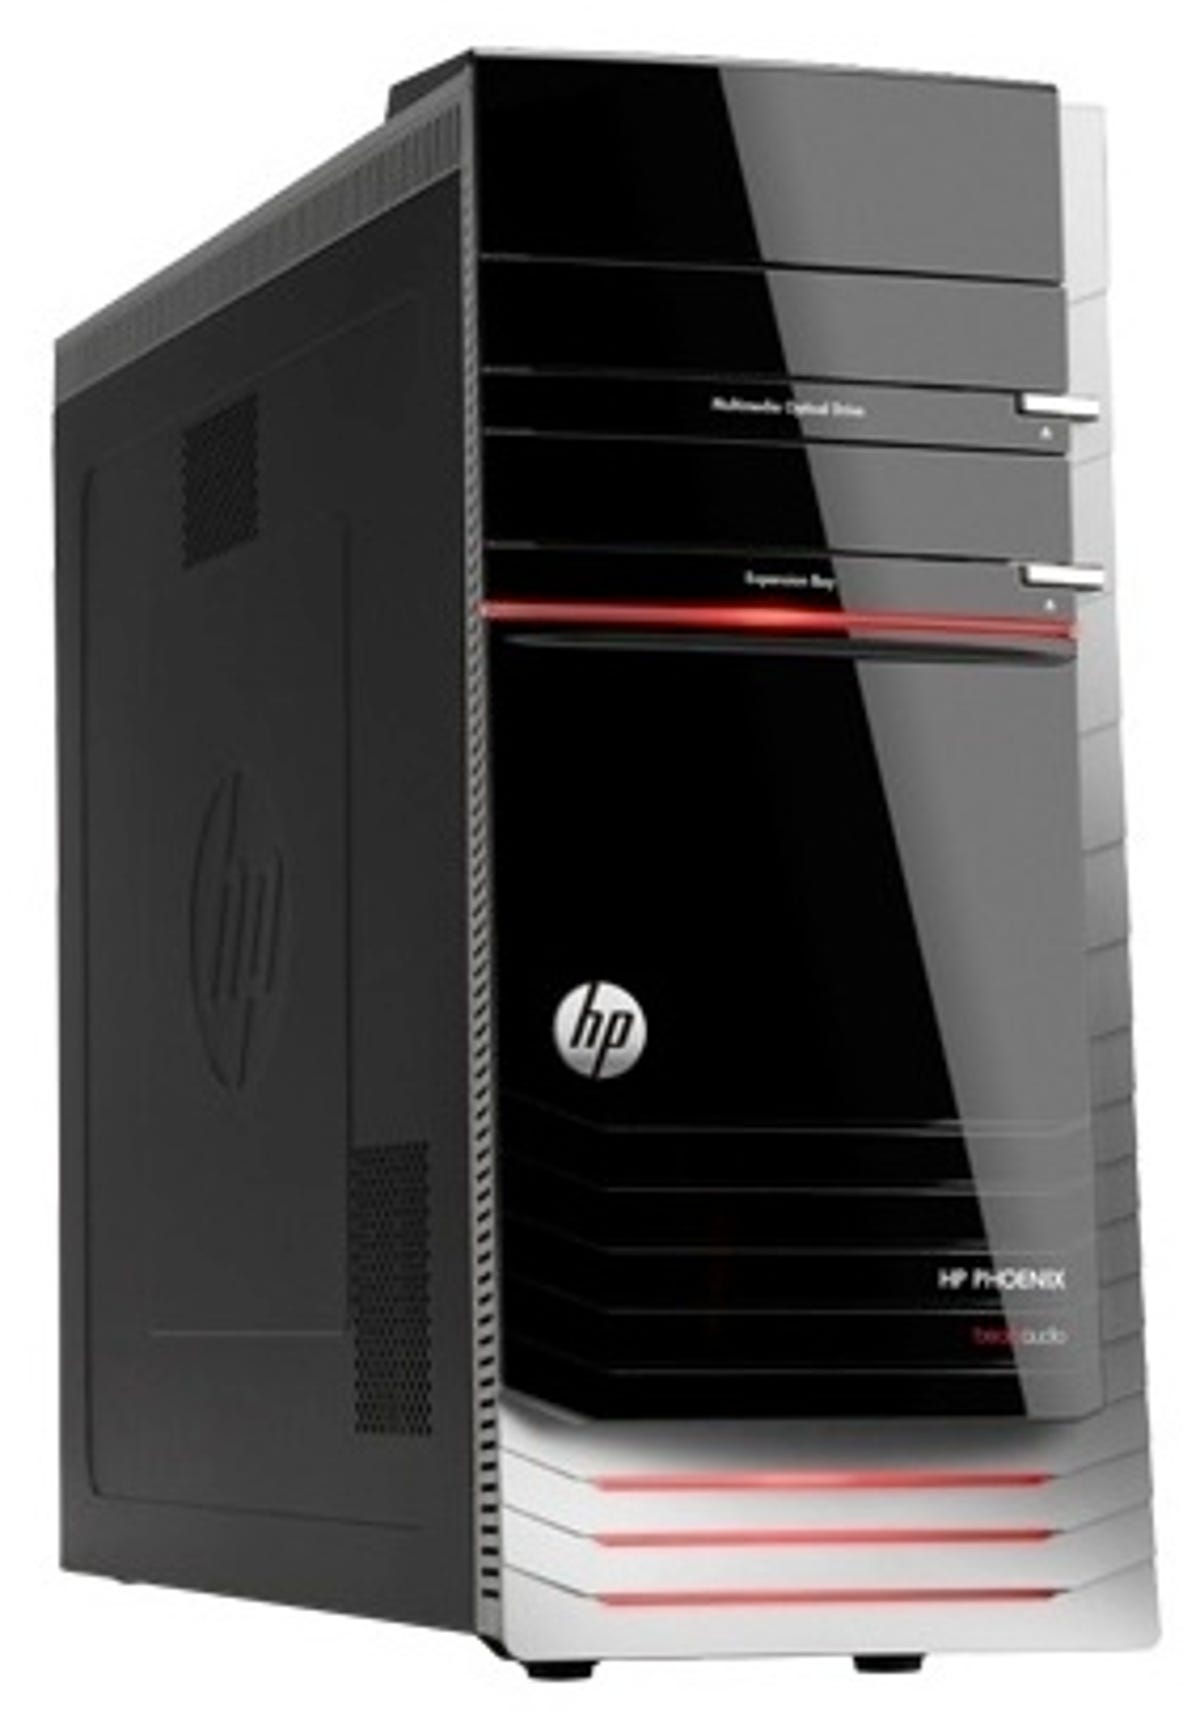 HP tower: maybe it's not the end of the traditional tower system but they're not a priority anymore for Intel.